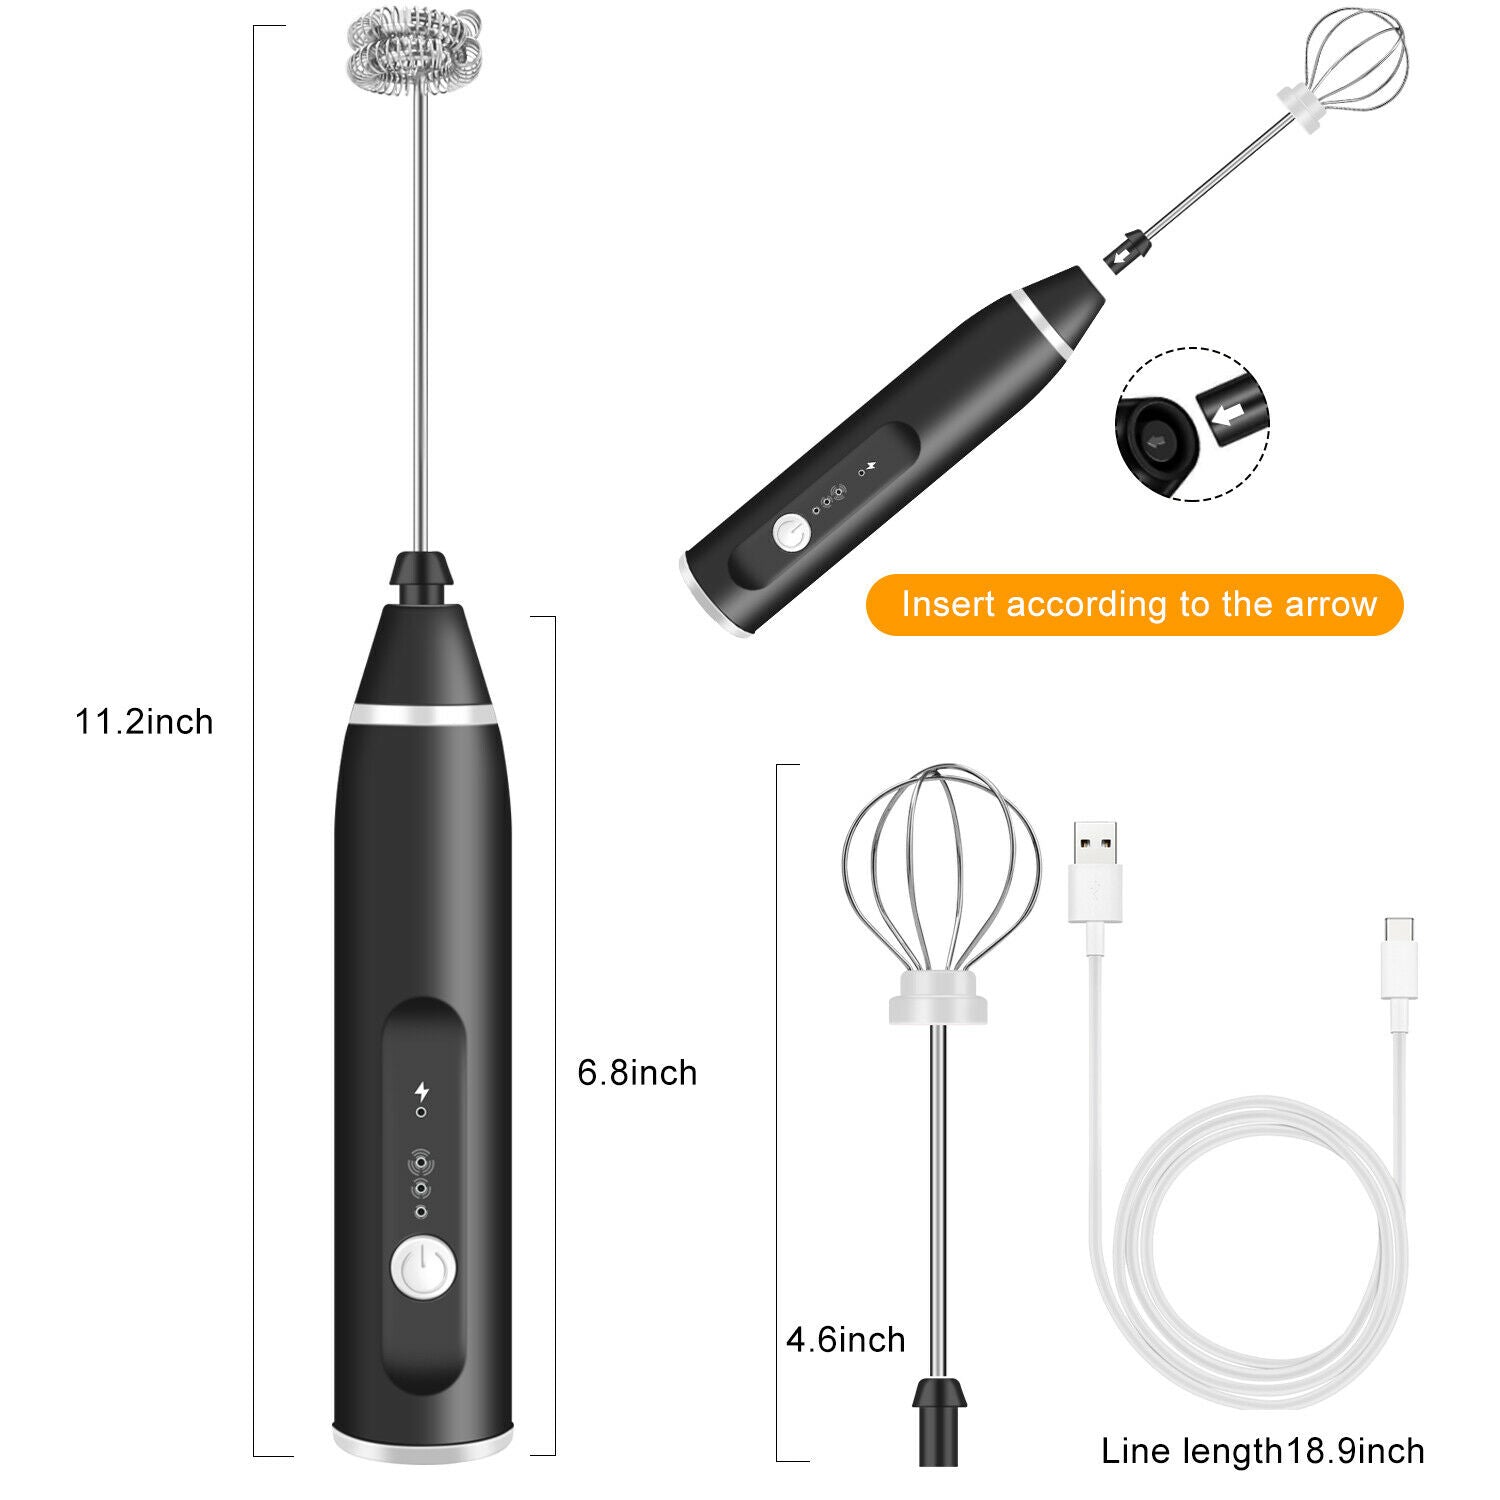 3 Pc Handheld Electric Milk Frother and Egg Beater, USB Charged